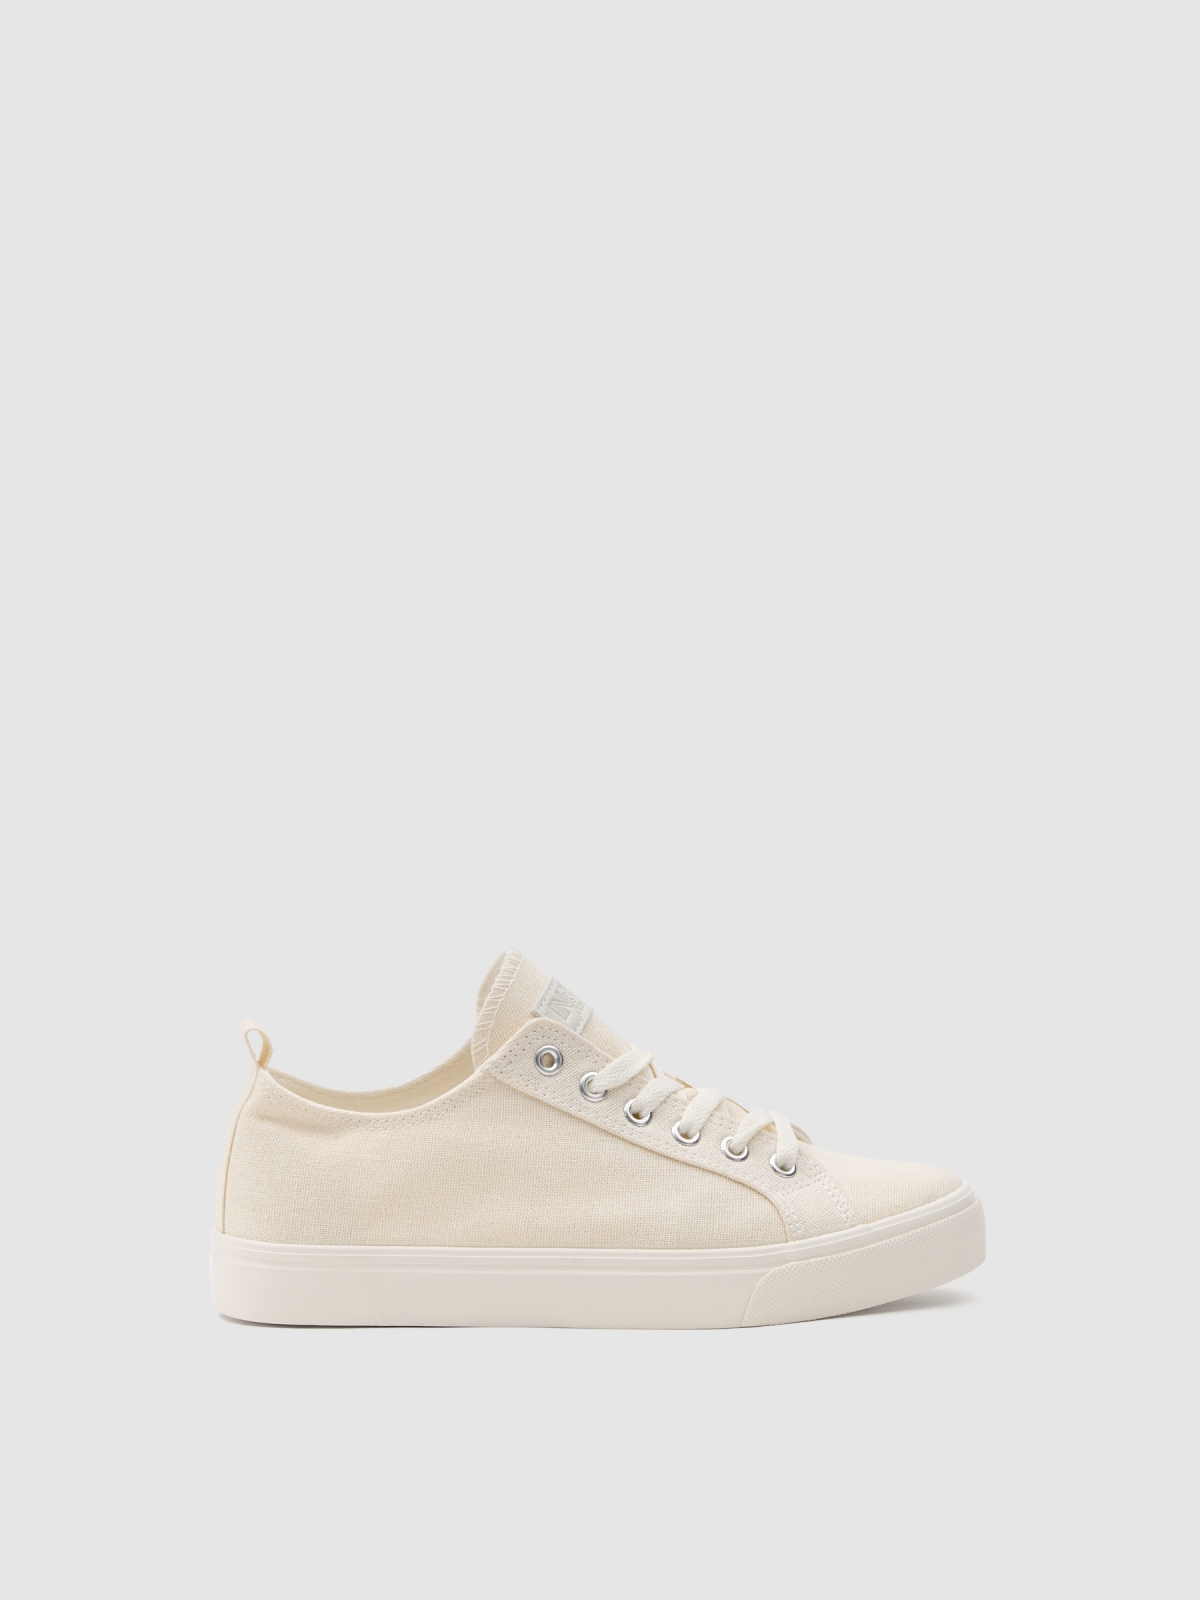 Shiny canvas sneaker off white with a model